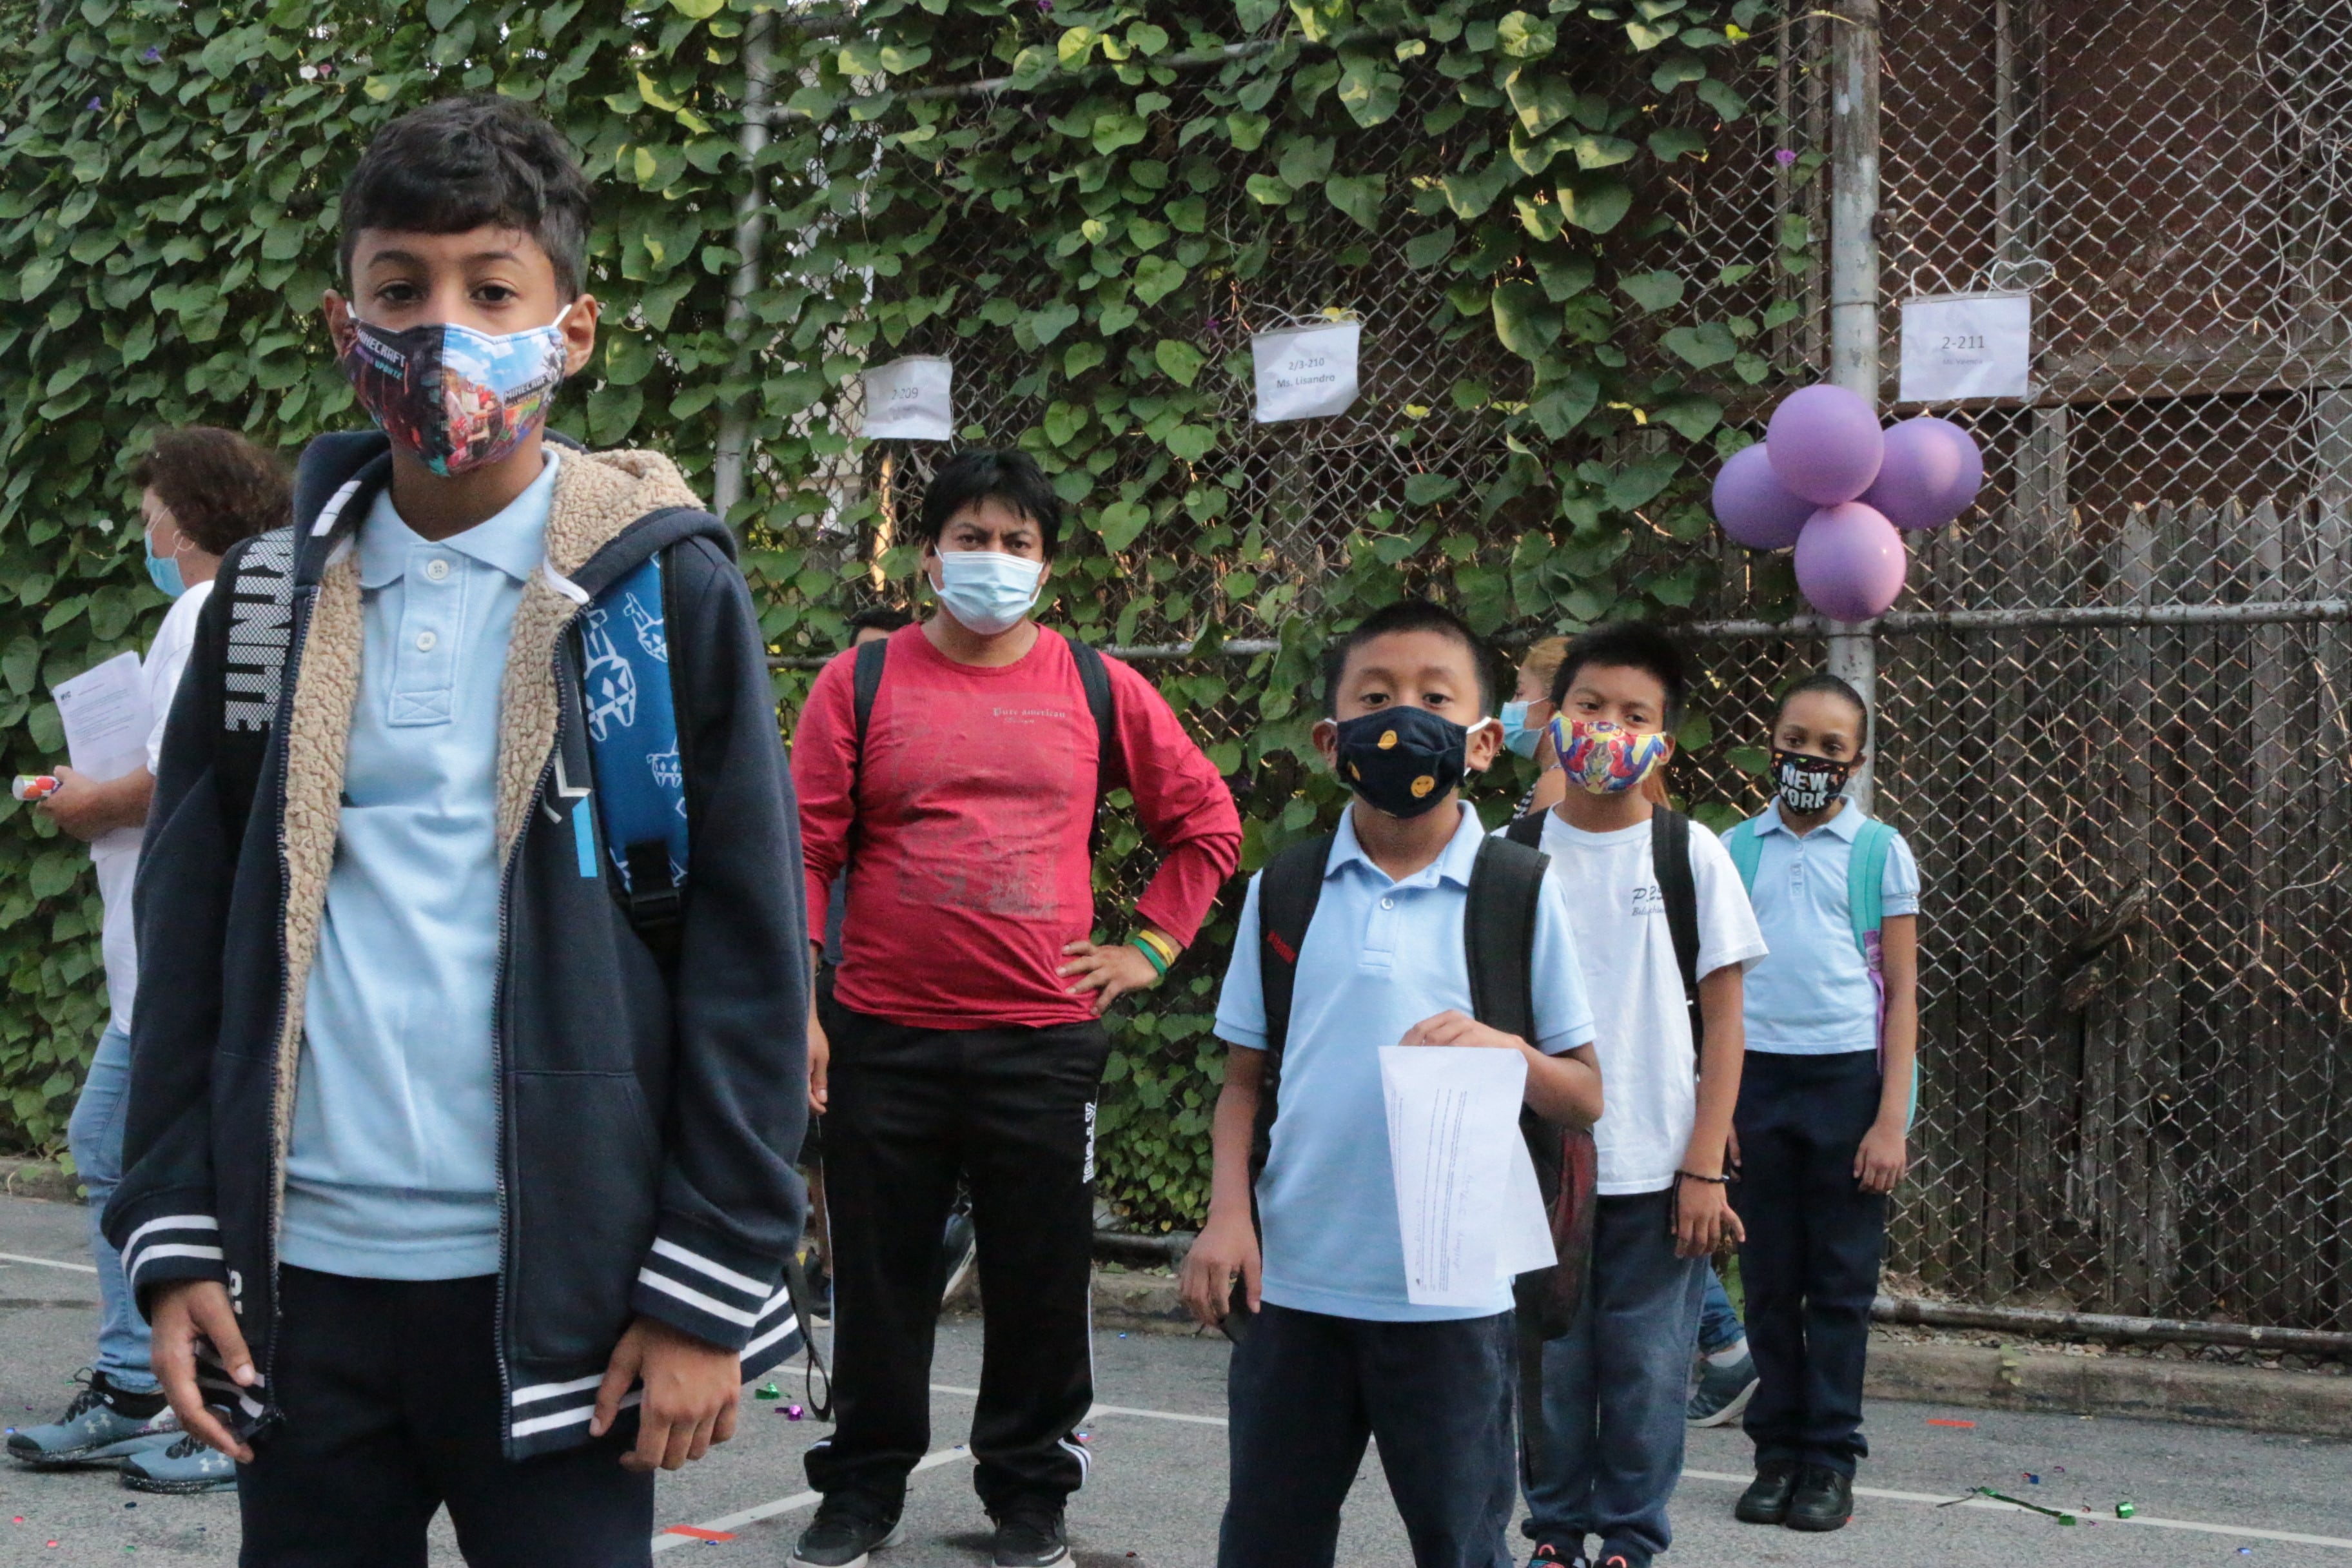 Students stand in a line next to a fence on the first day of school, each wearing protective masks.